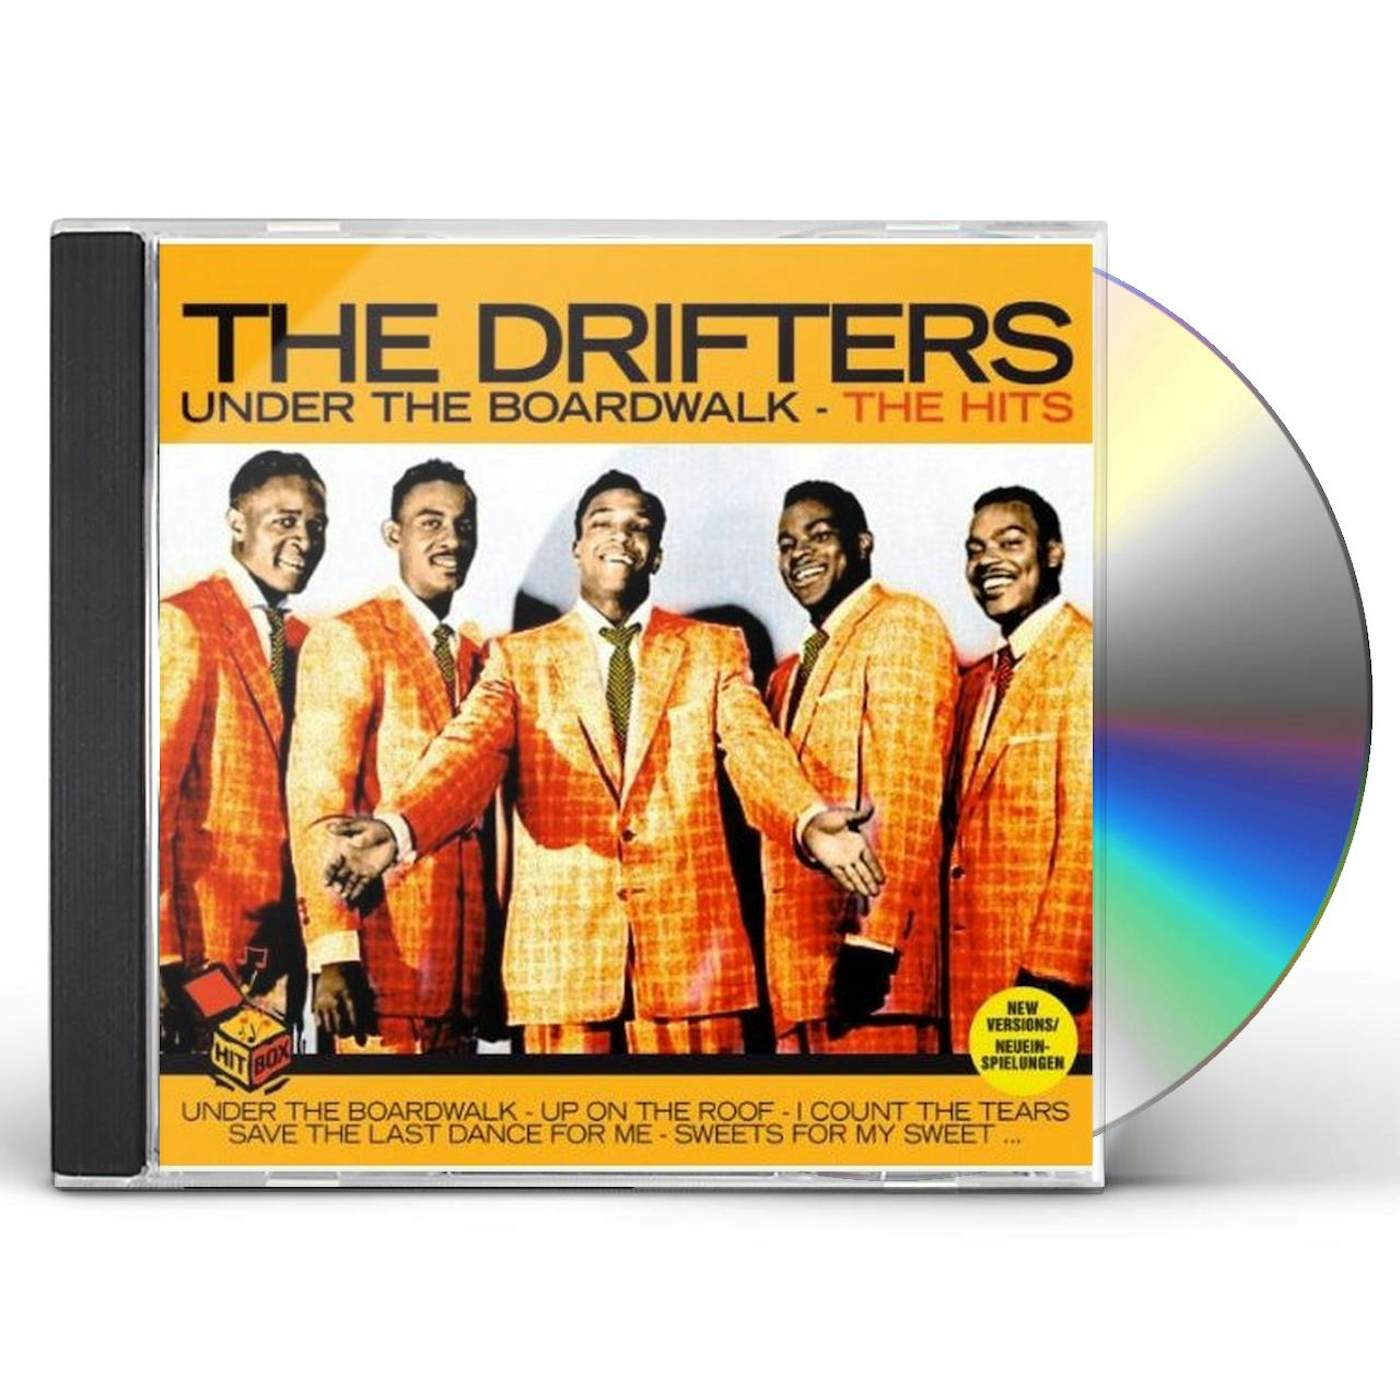 The Drifters UNDER THE BOARDWALK-THE HITS CD